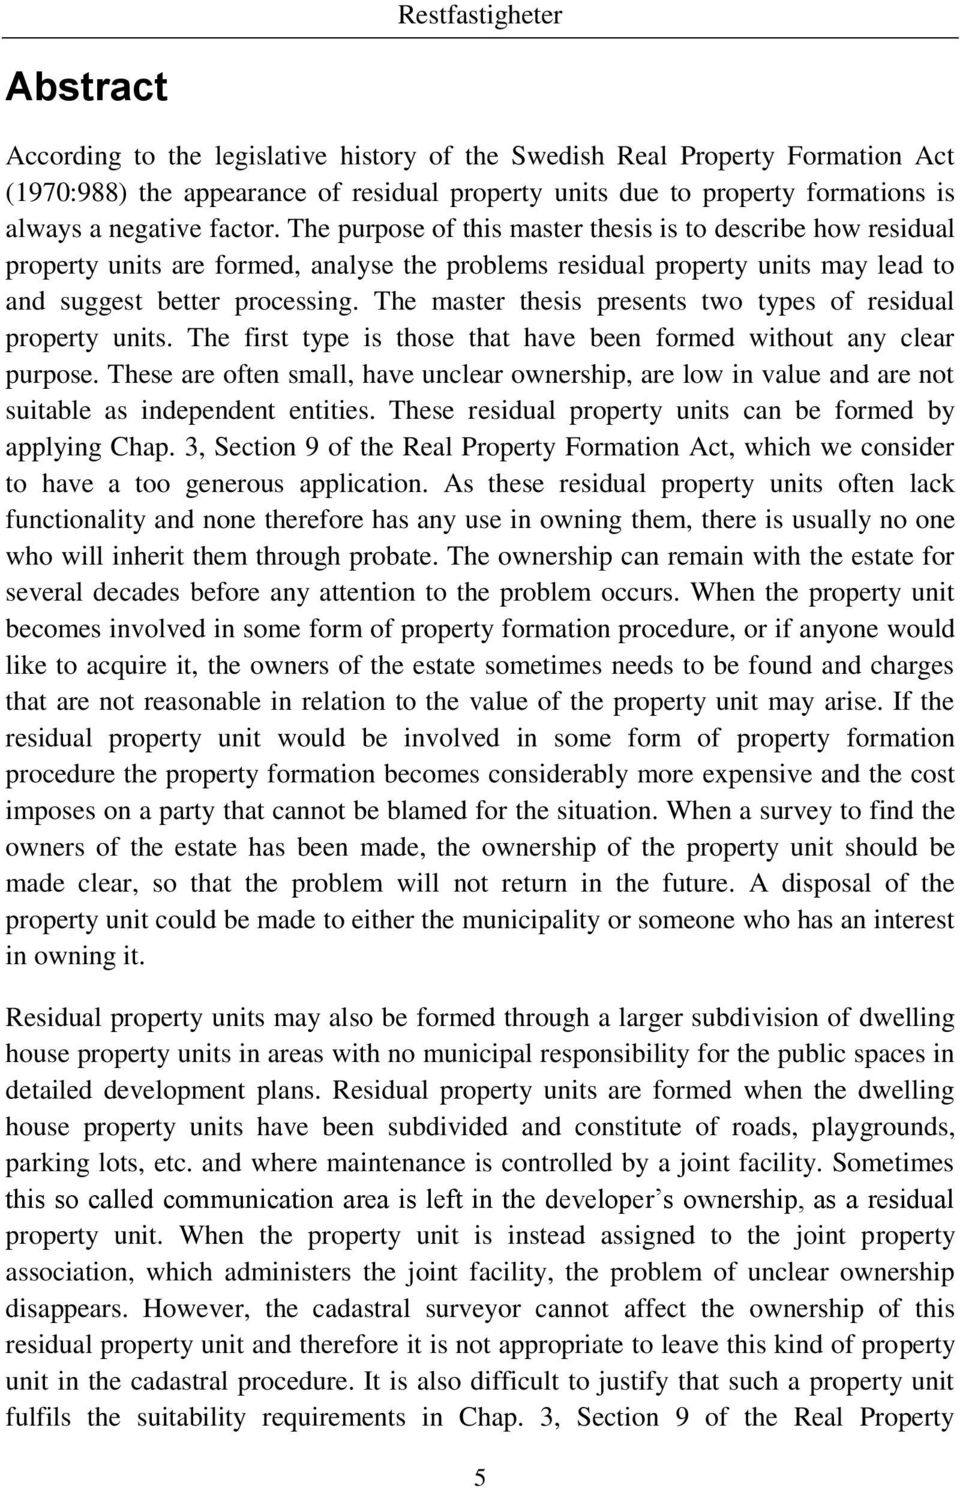 The master thesis presents two types of residual property units. The first type is those that have been formed without any clear purpose.